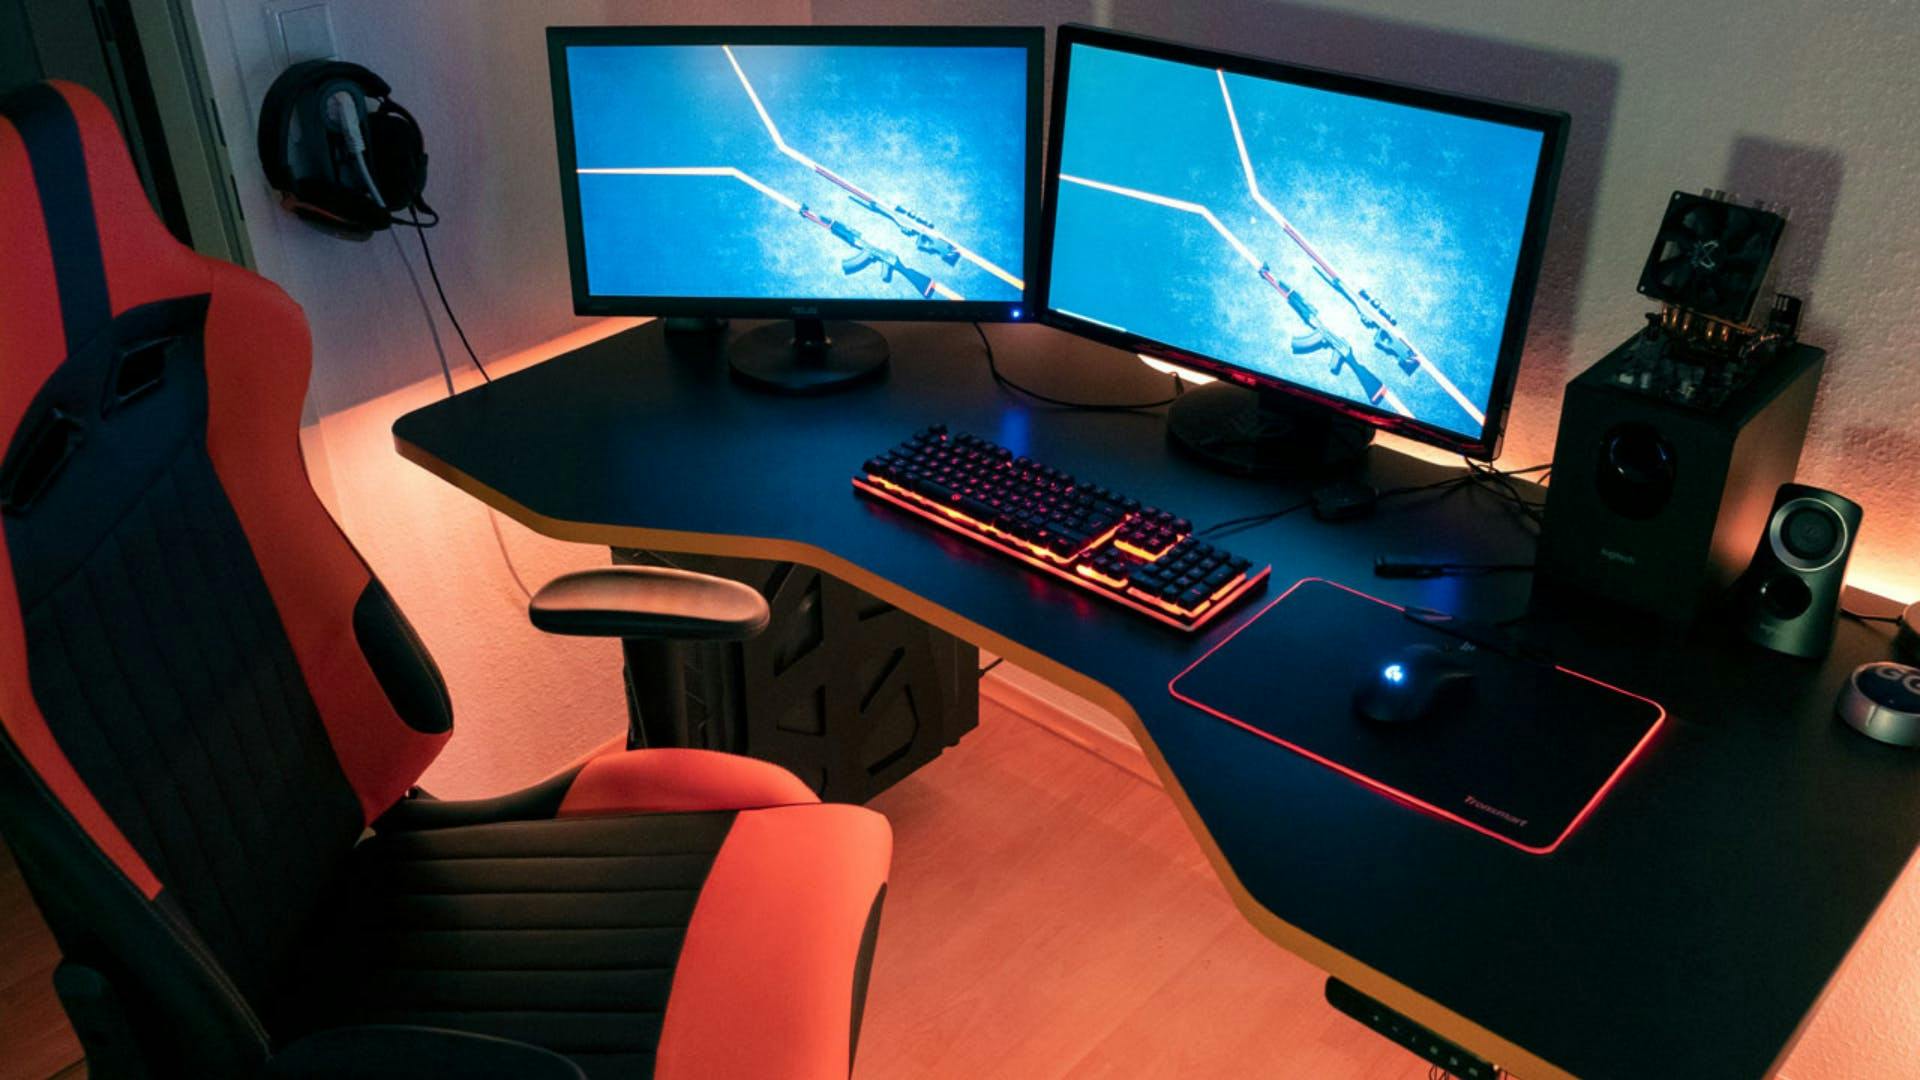 How to put together a gaming setup